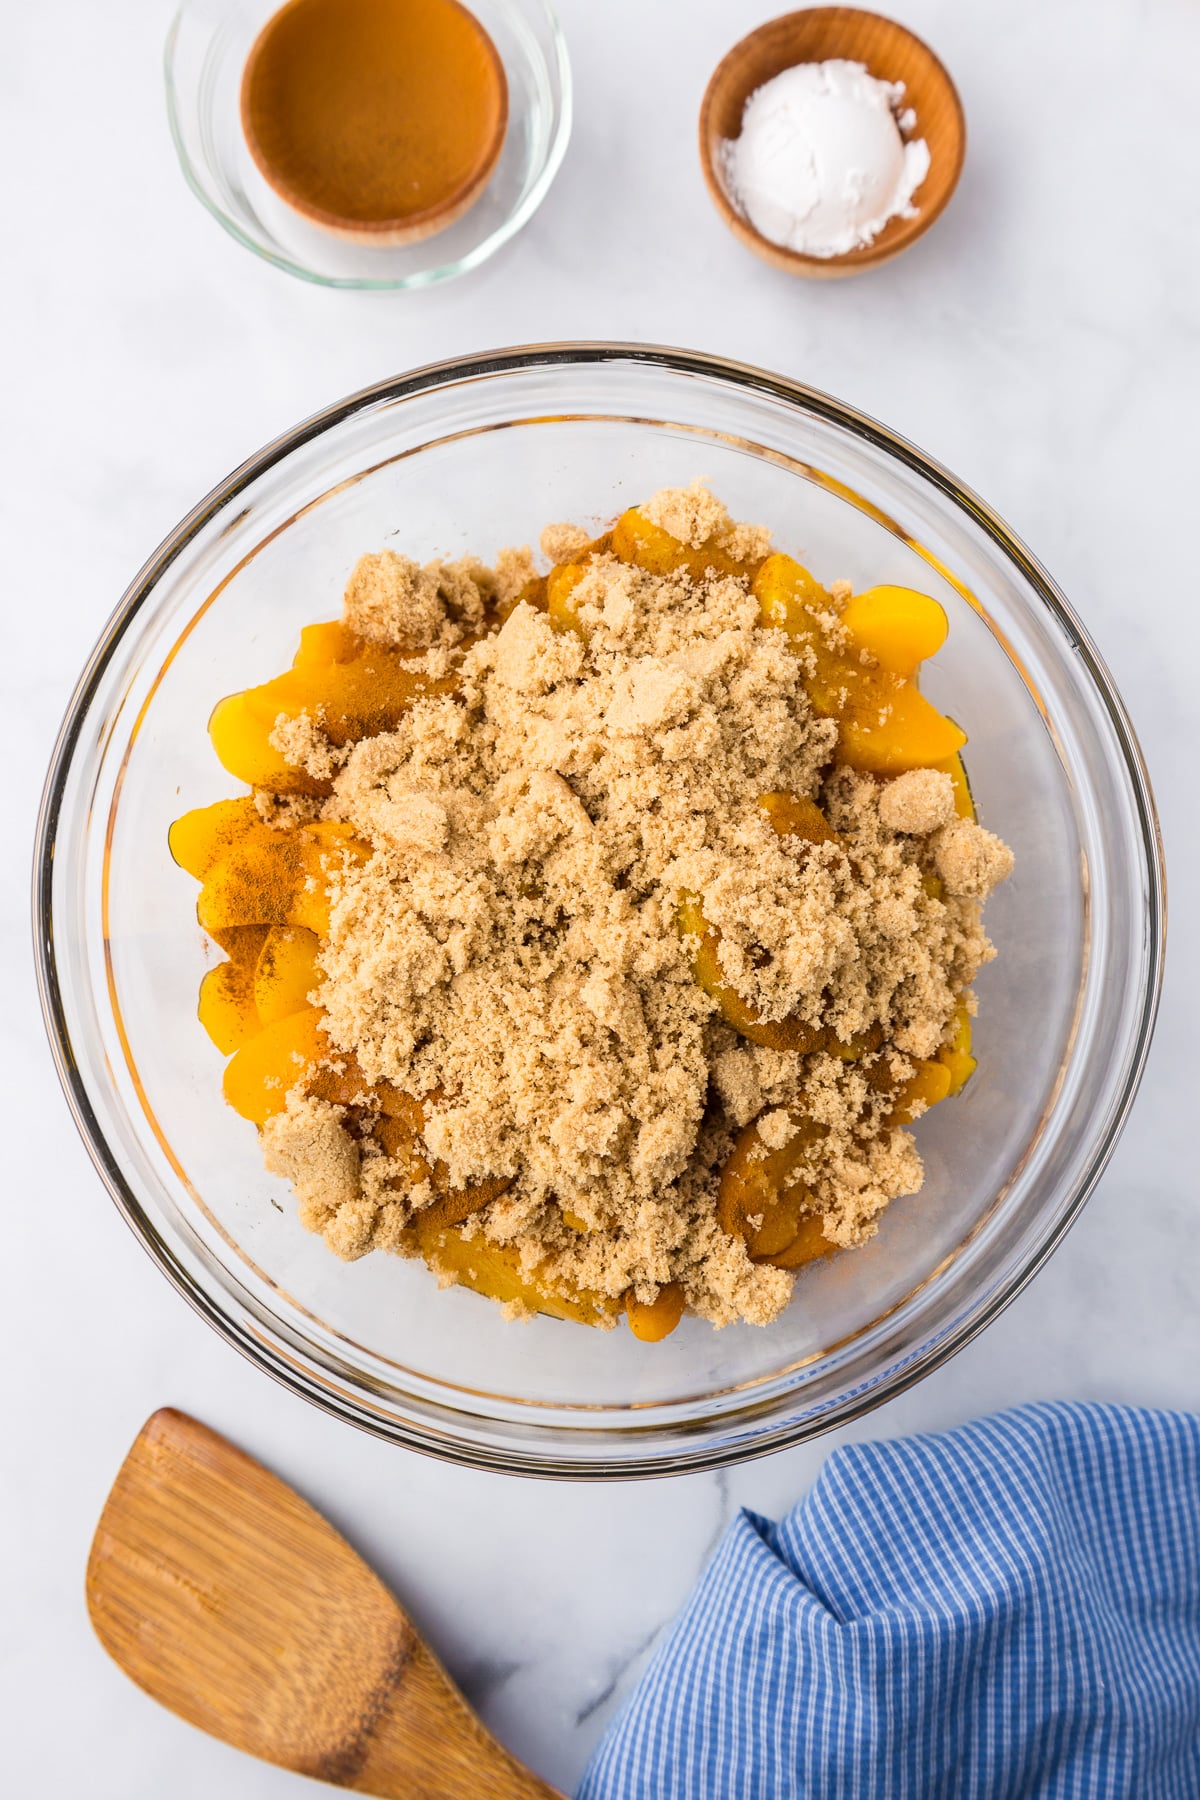 Peaches, brown sugar, cinnamon and other ingredients being mixed together in a large bowl from overhead.